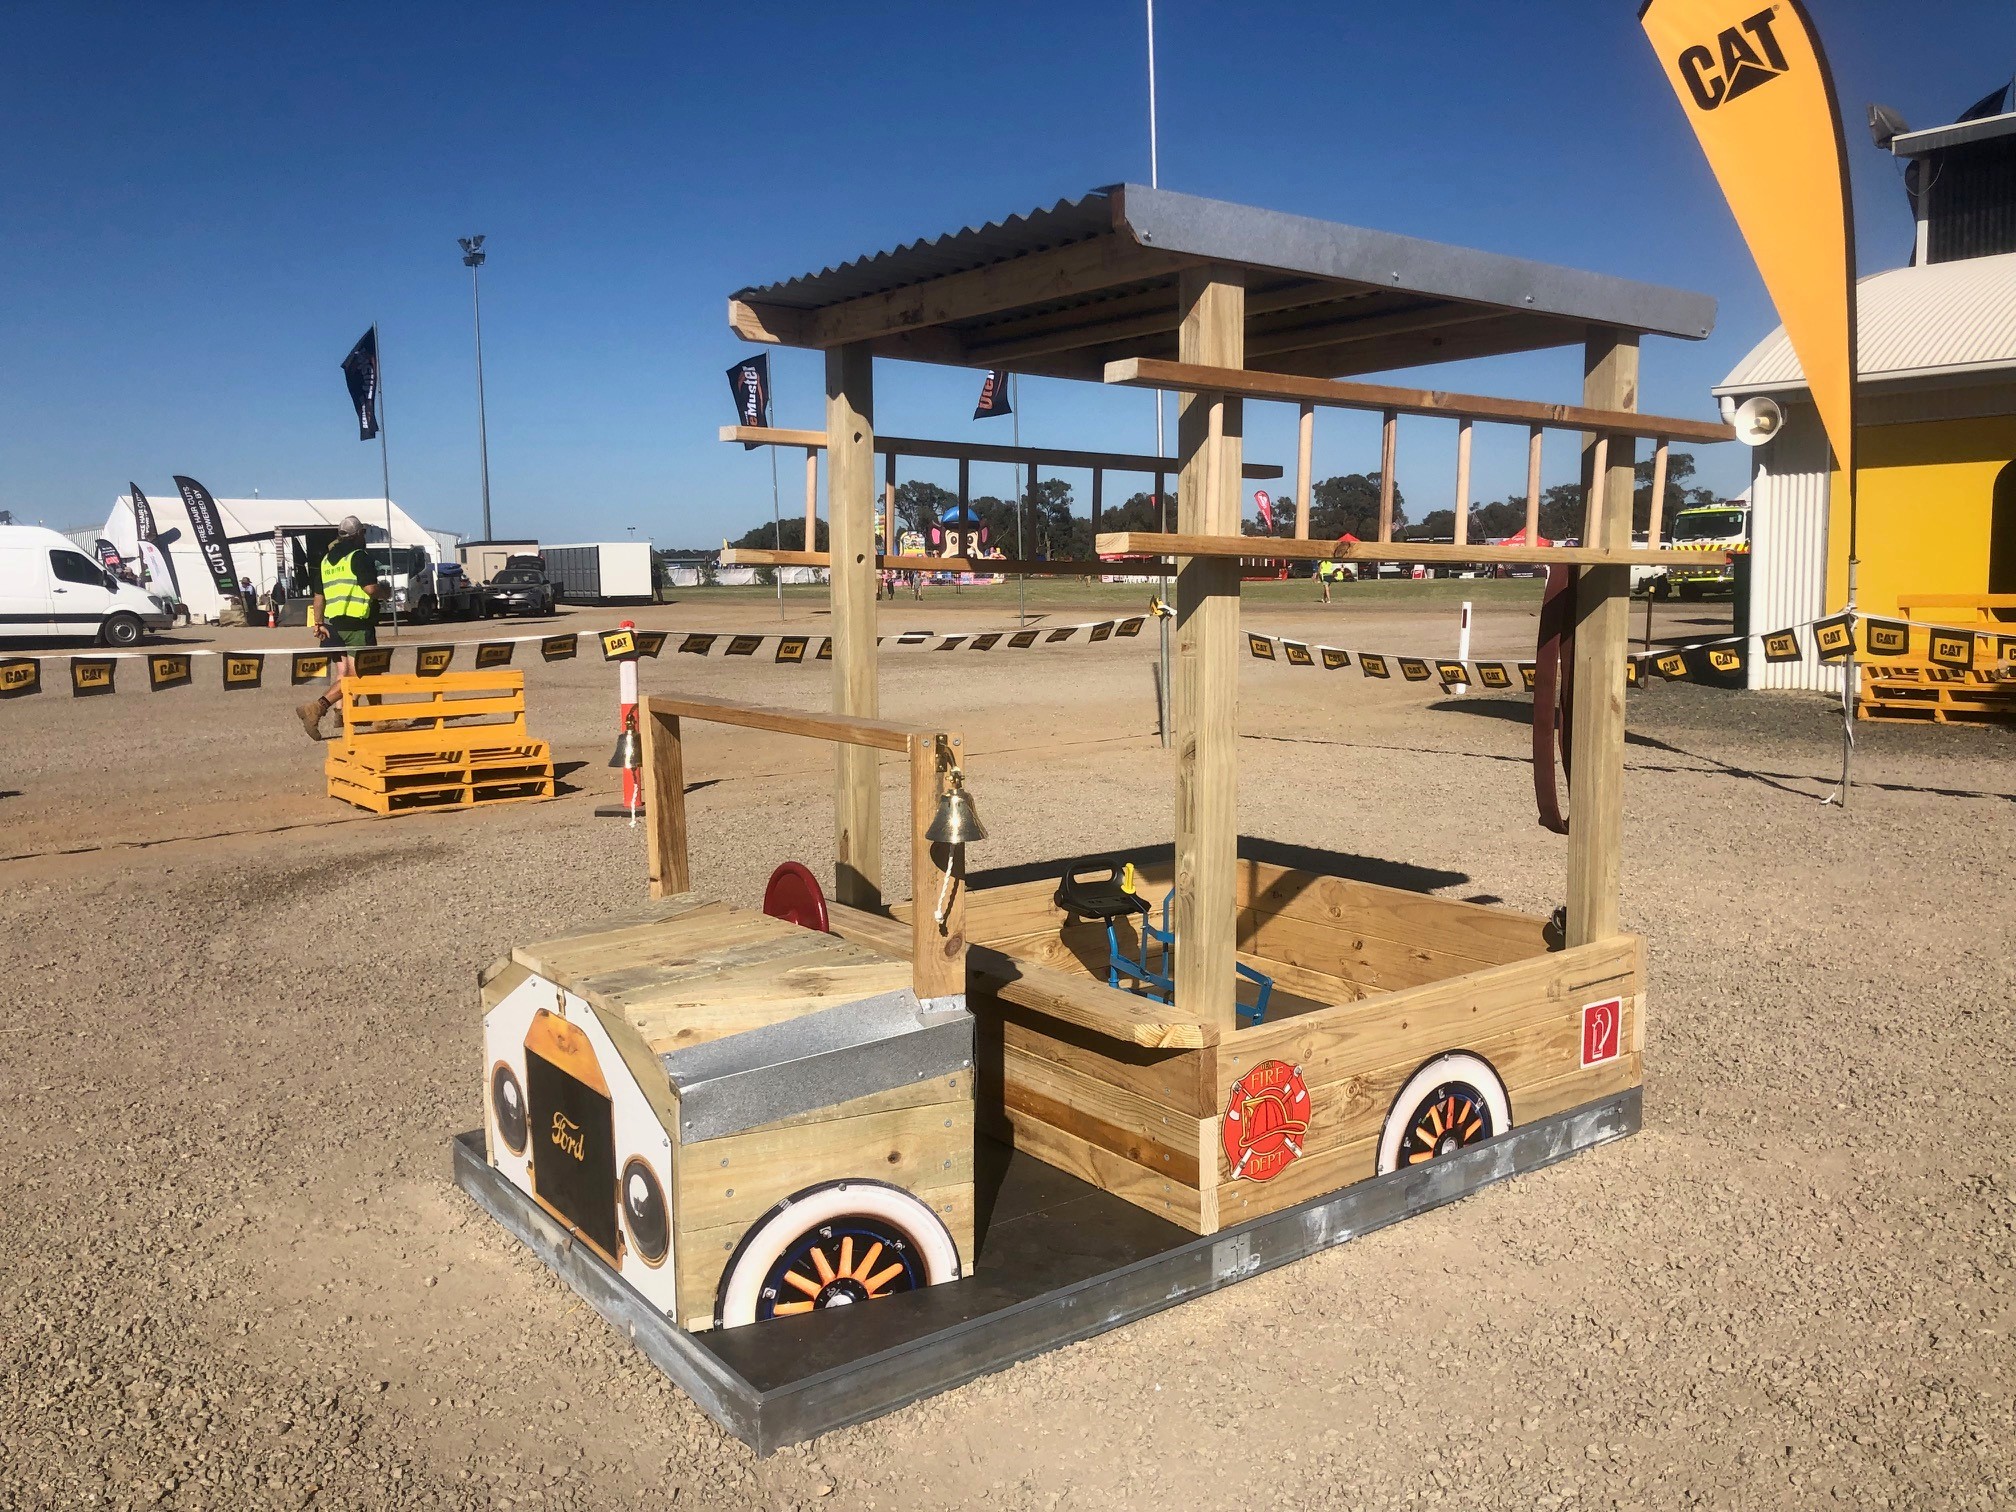 Another sandpit design at the 2023 Deni Ute Muster sand pit auction fundraiser for Country Education Foundation of Edward River Region.